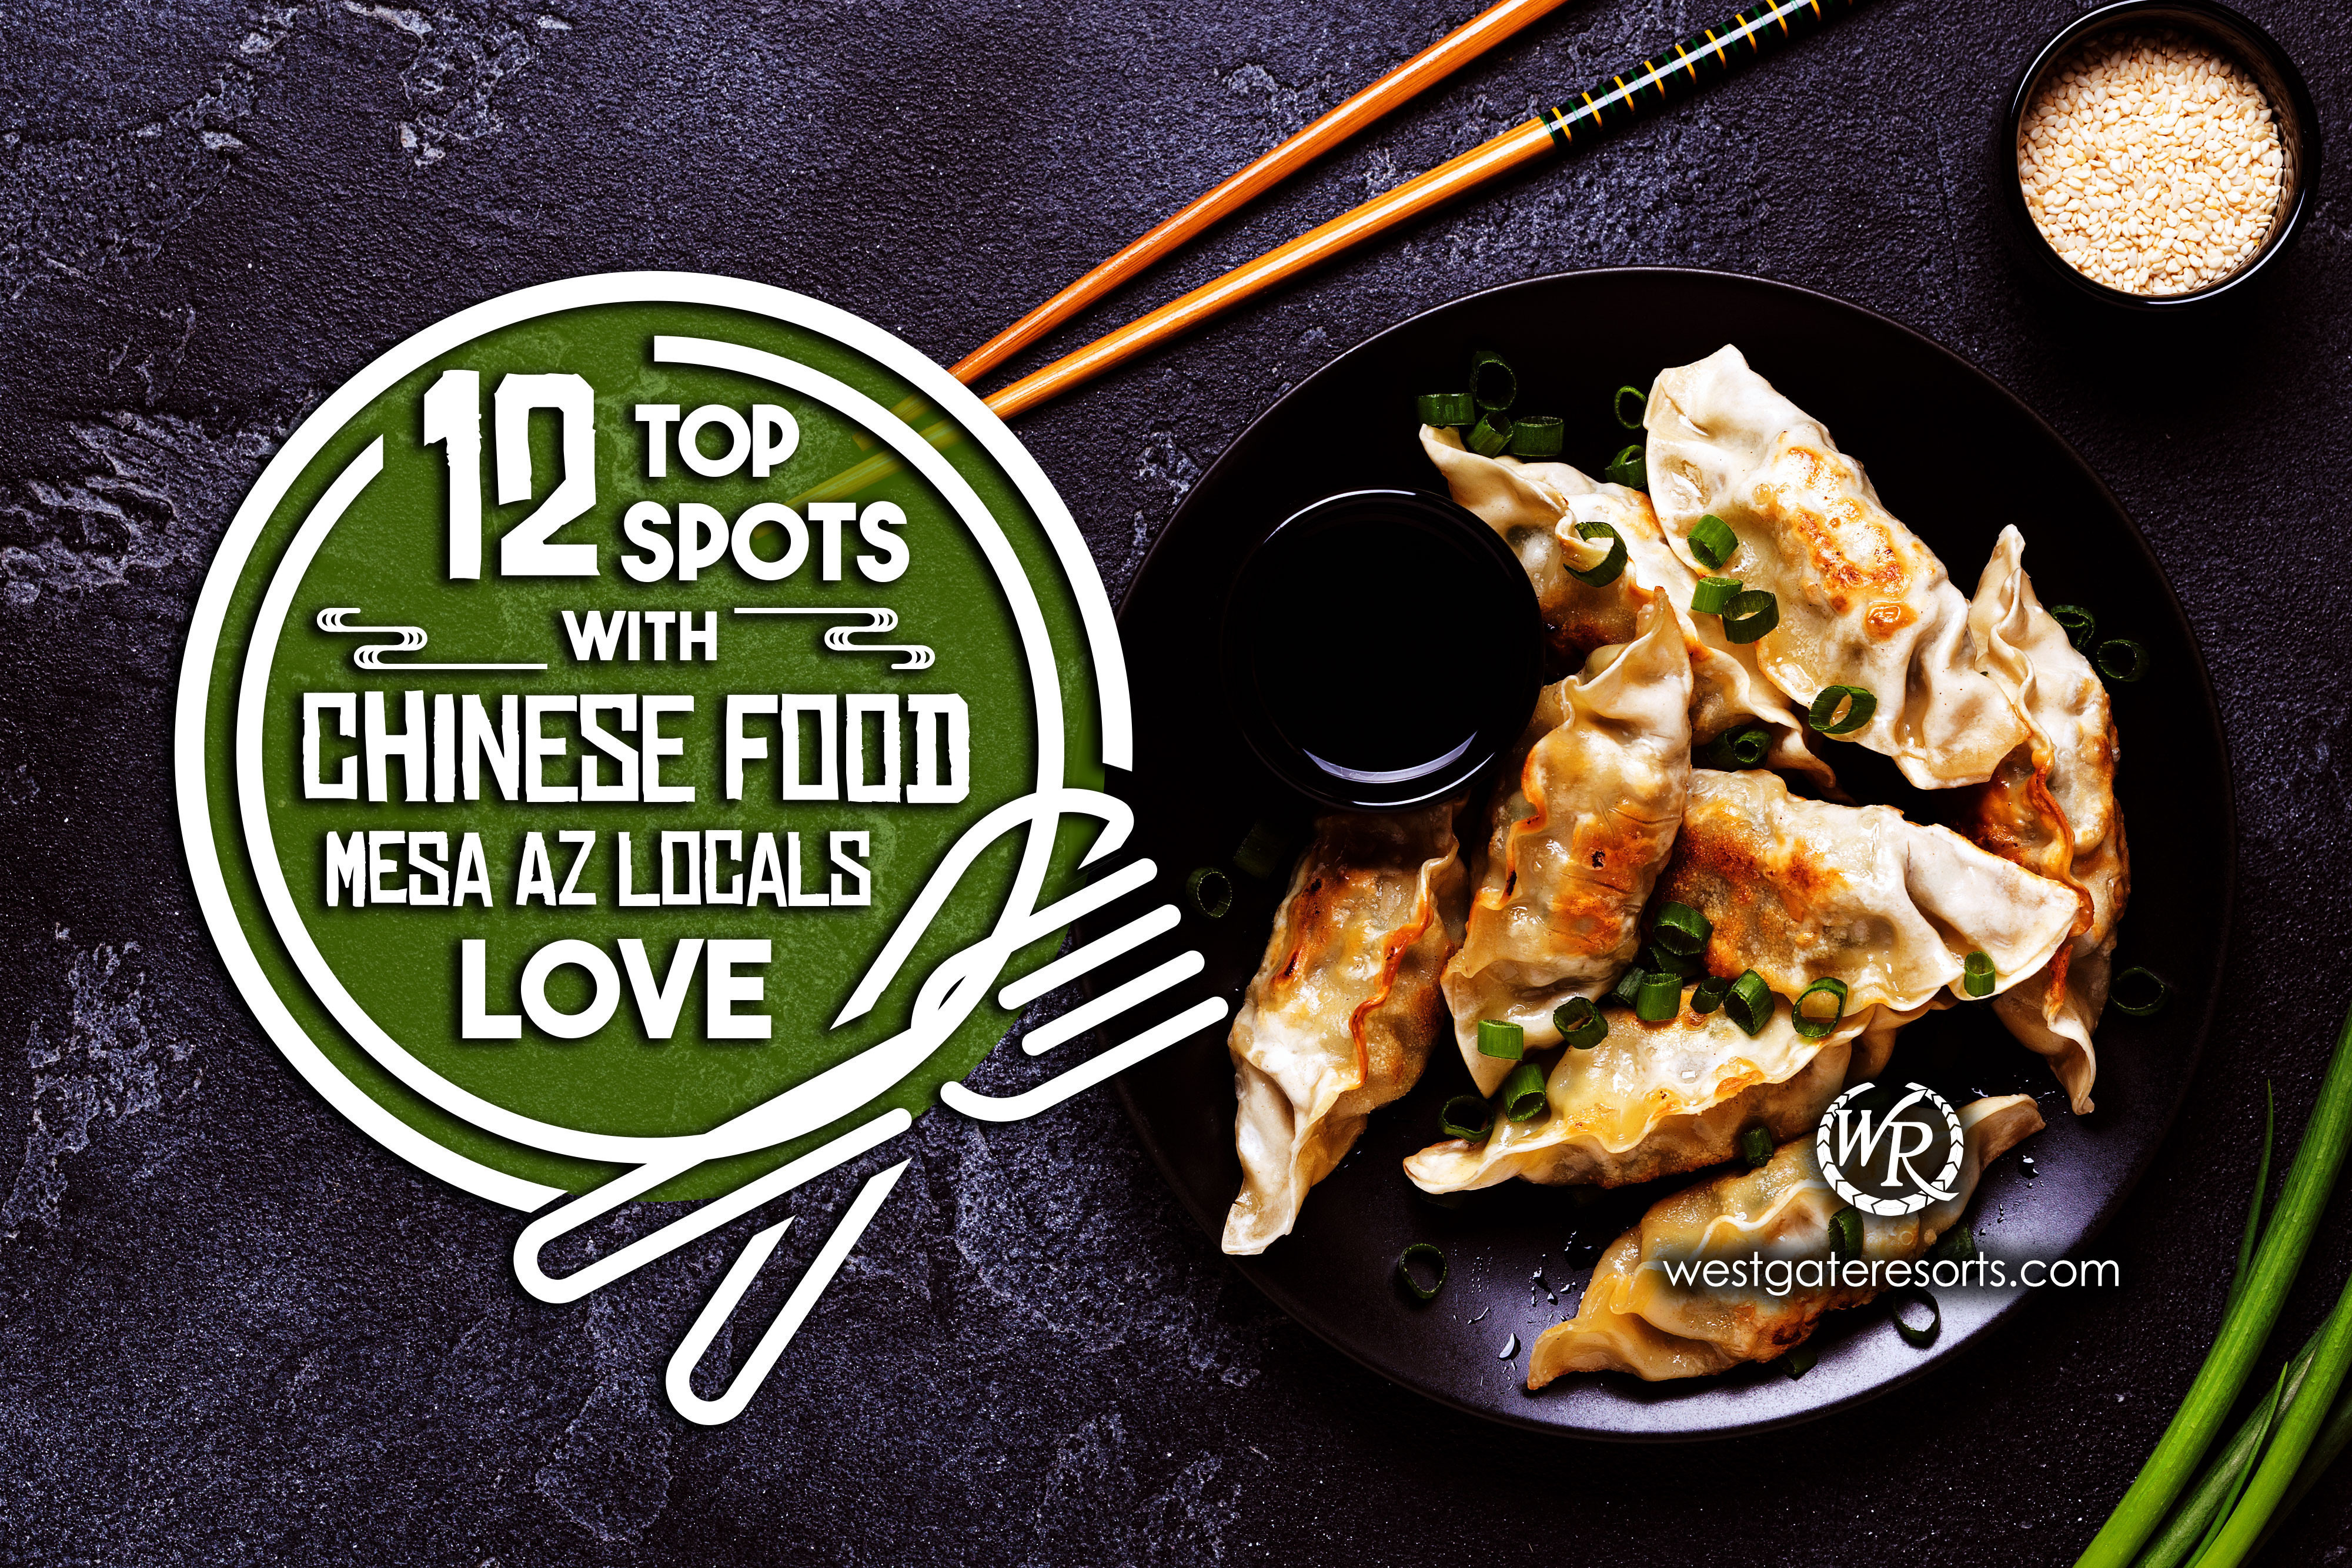 12 Top Spots to Find Chinese Food Mesa AZ Locals Can't Get Enough Of